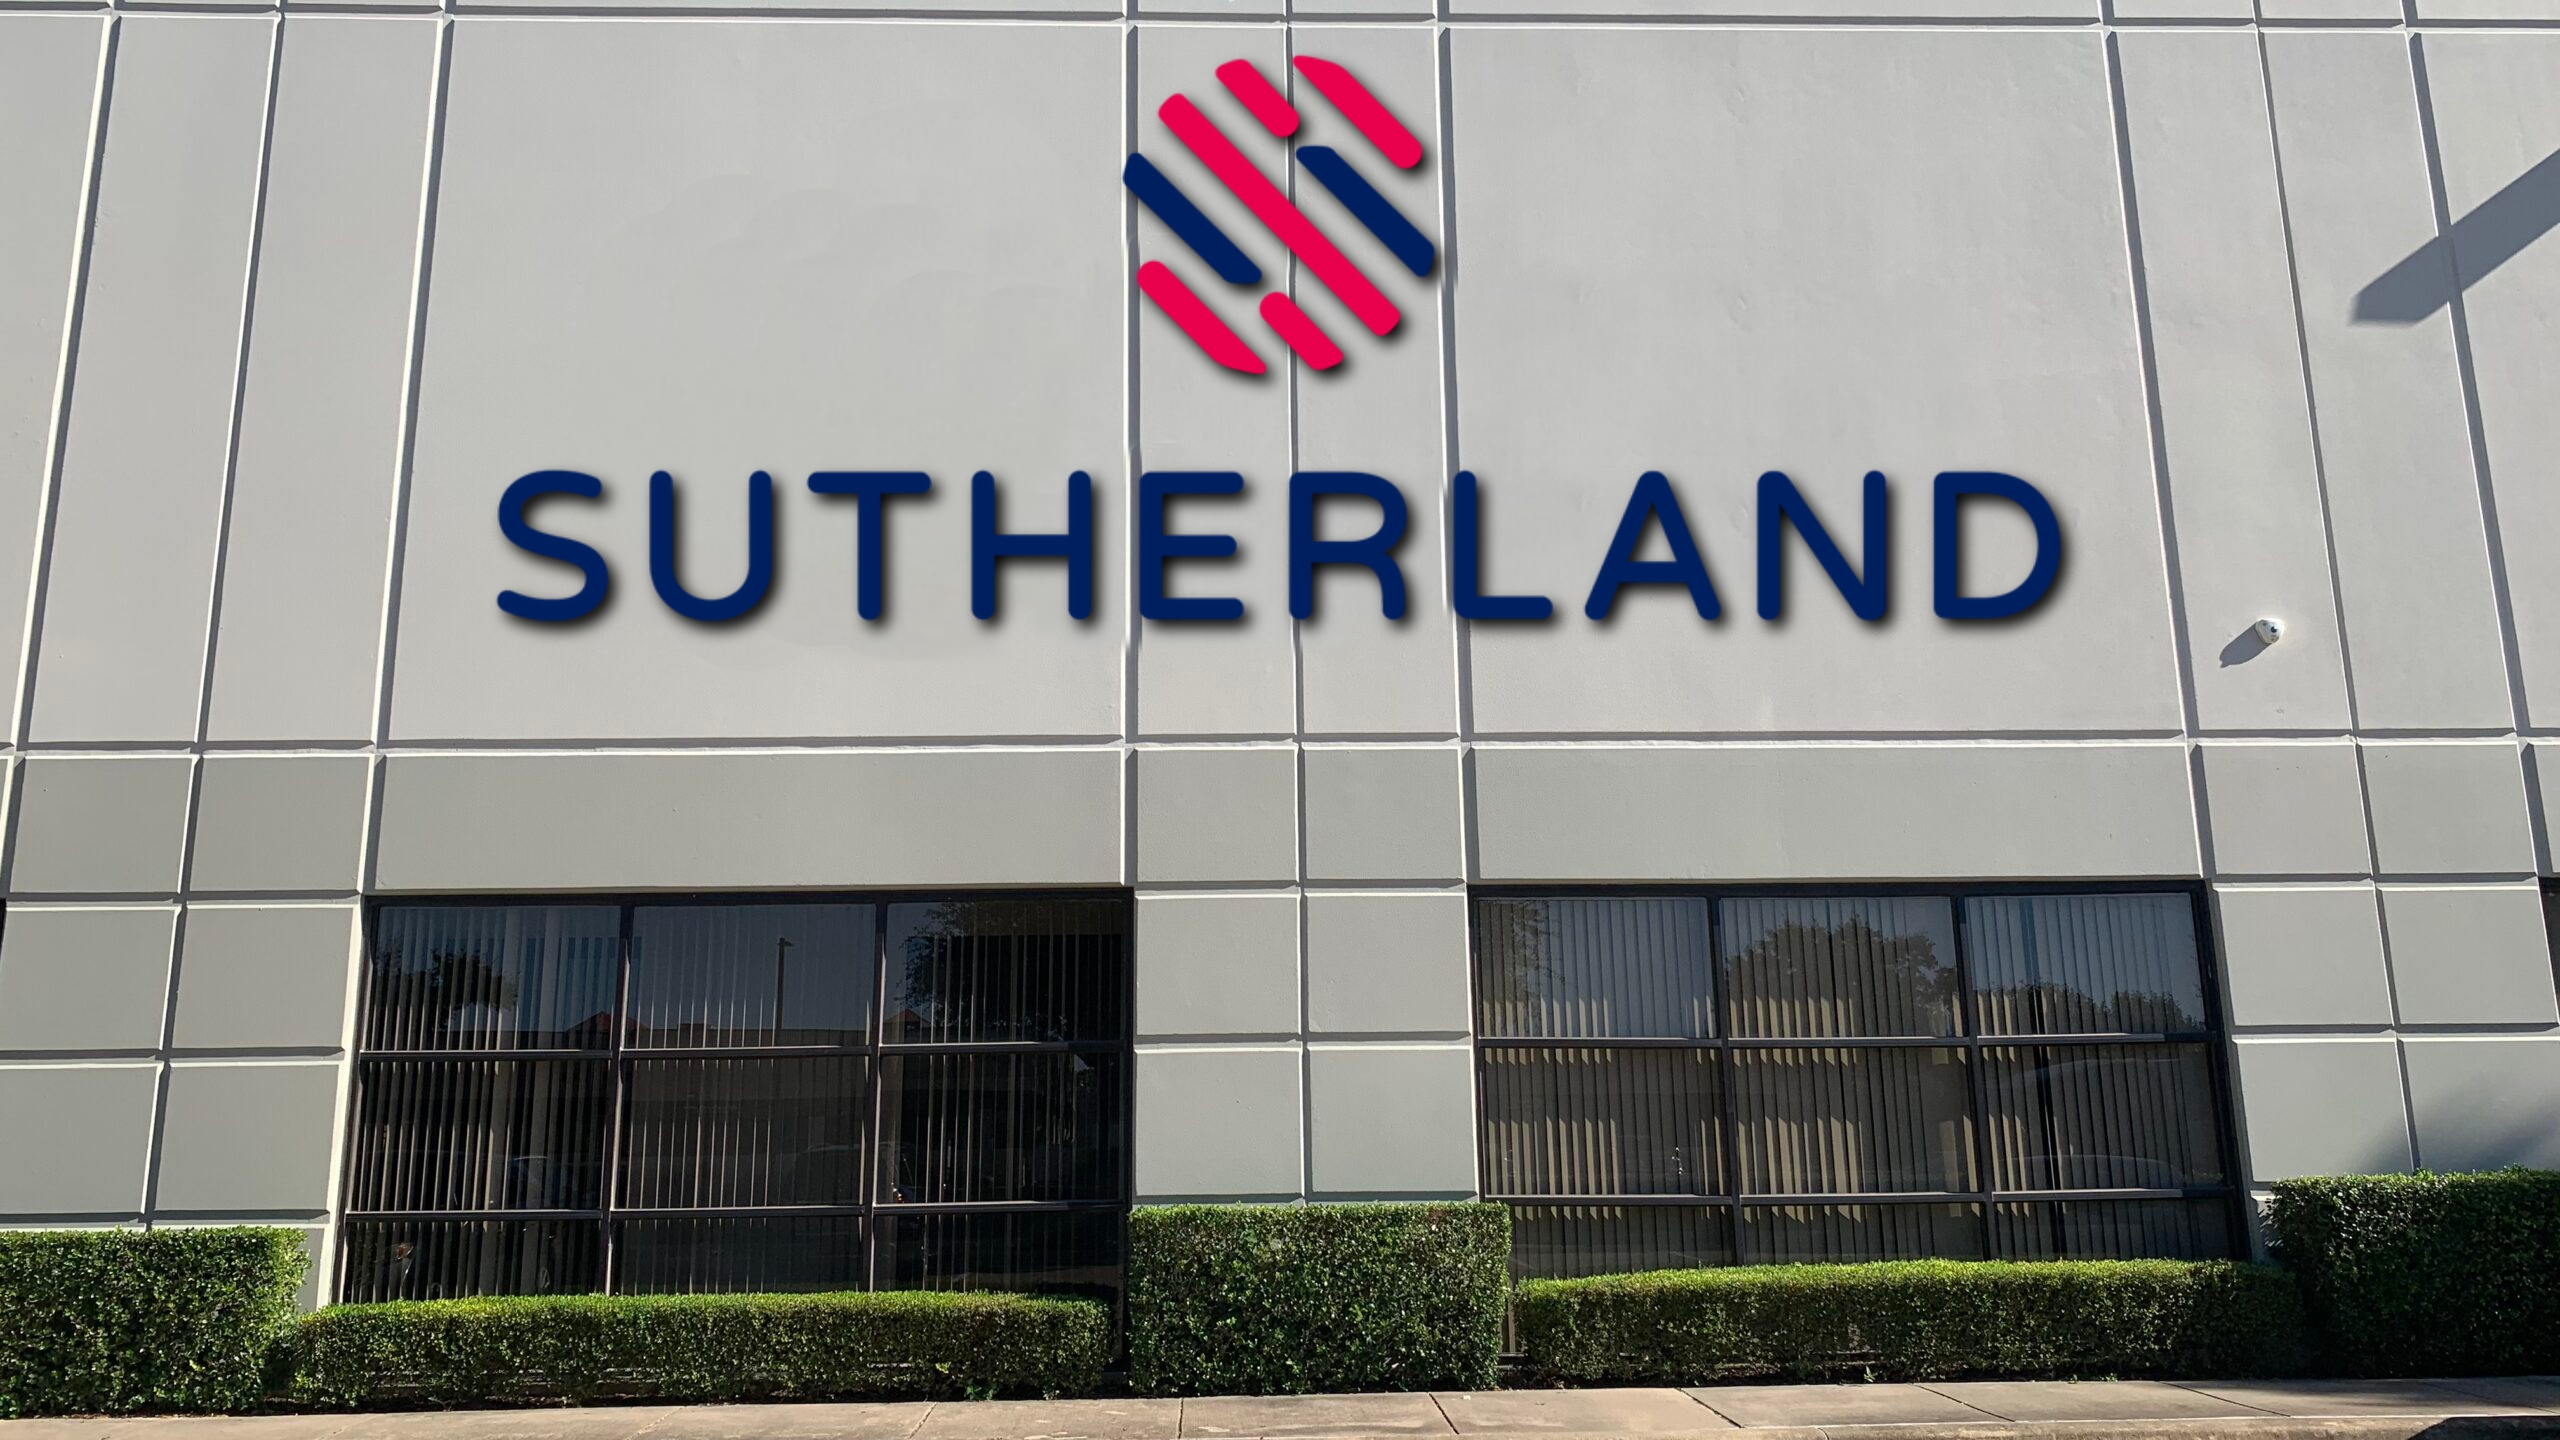 Permanent Work@Home Sutherland-Freshers-Storage Engineer-Day Shift | Apply now !